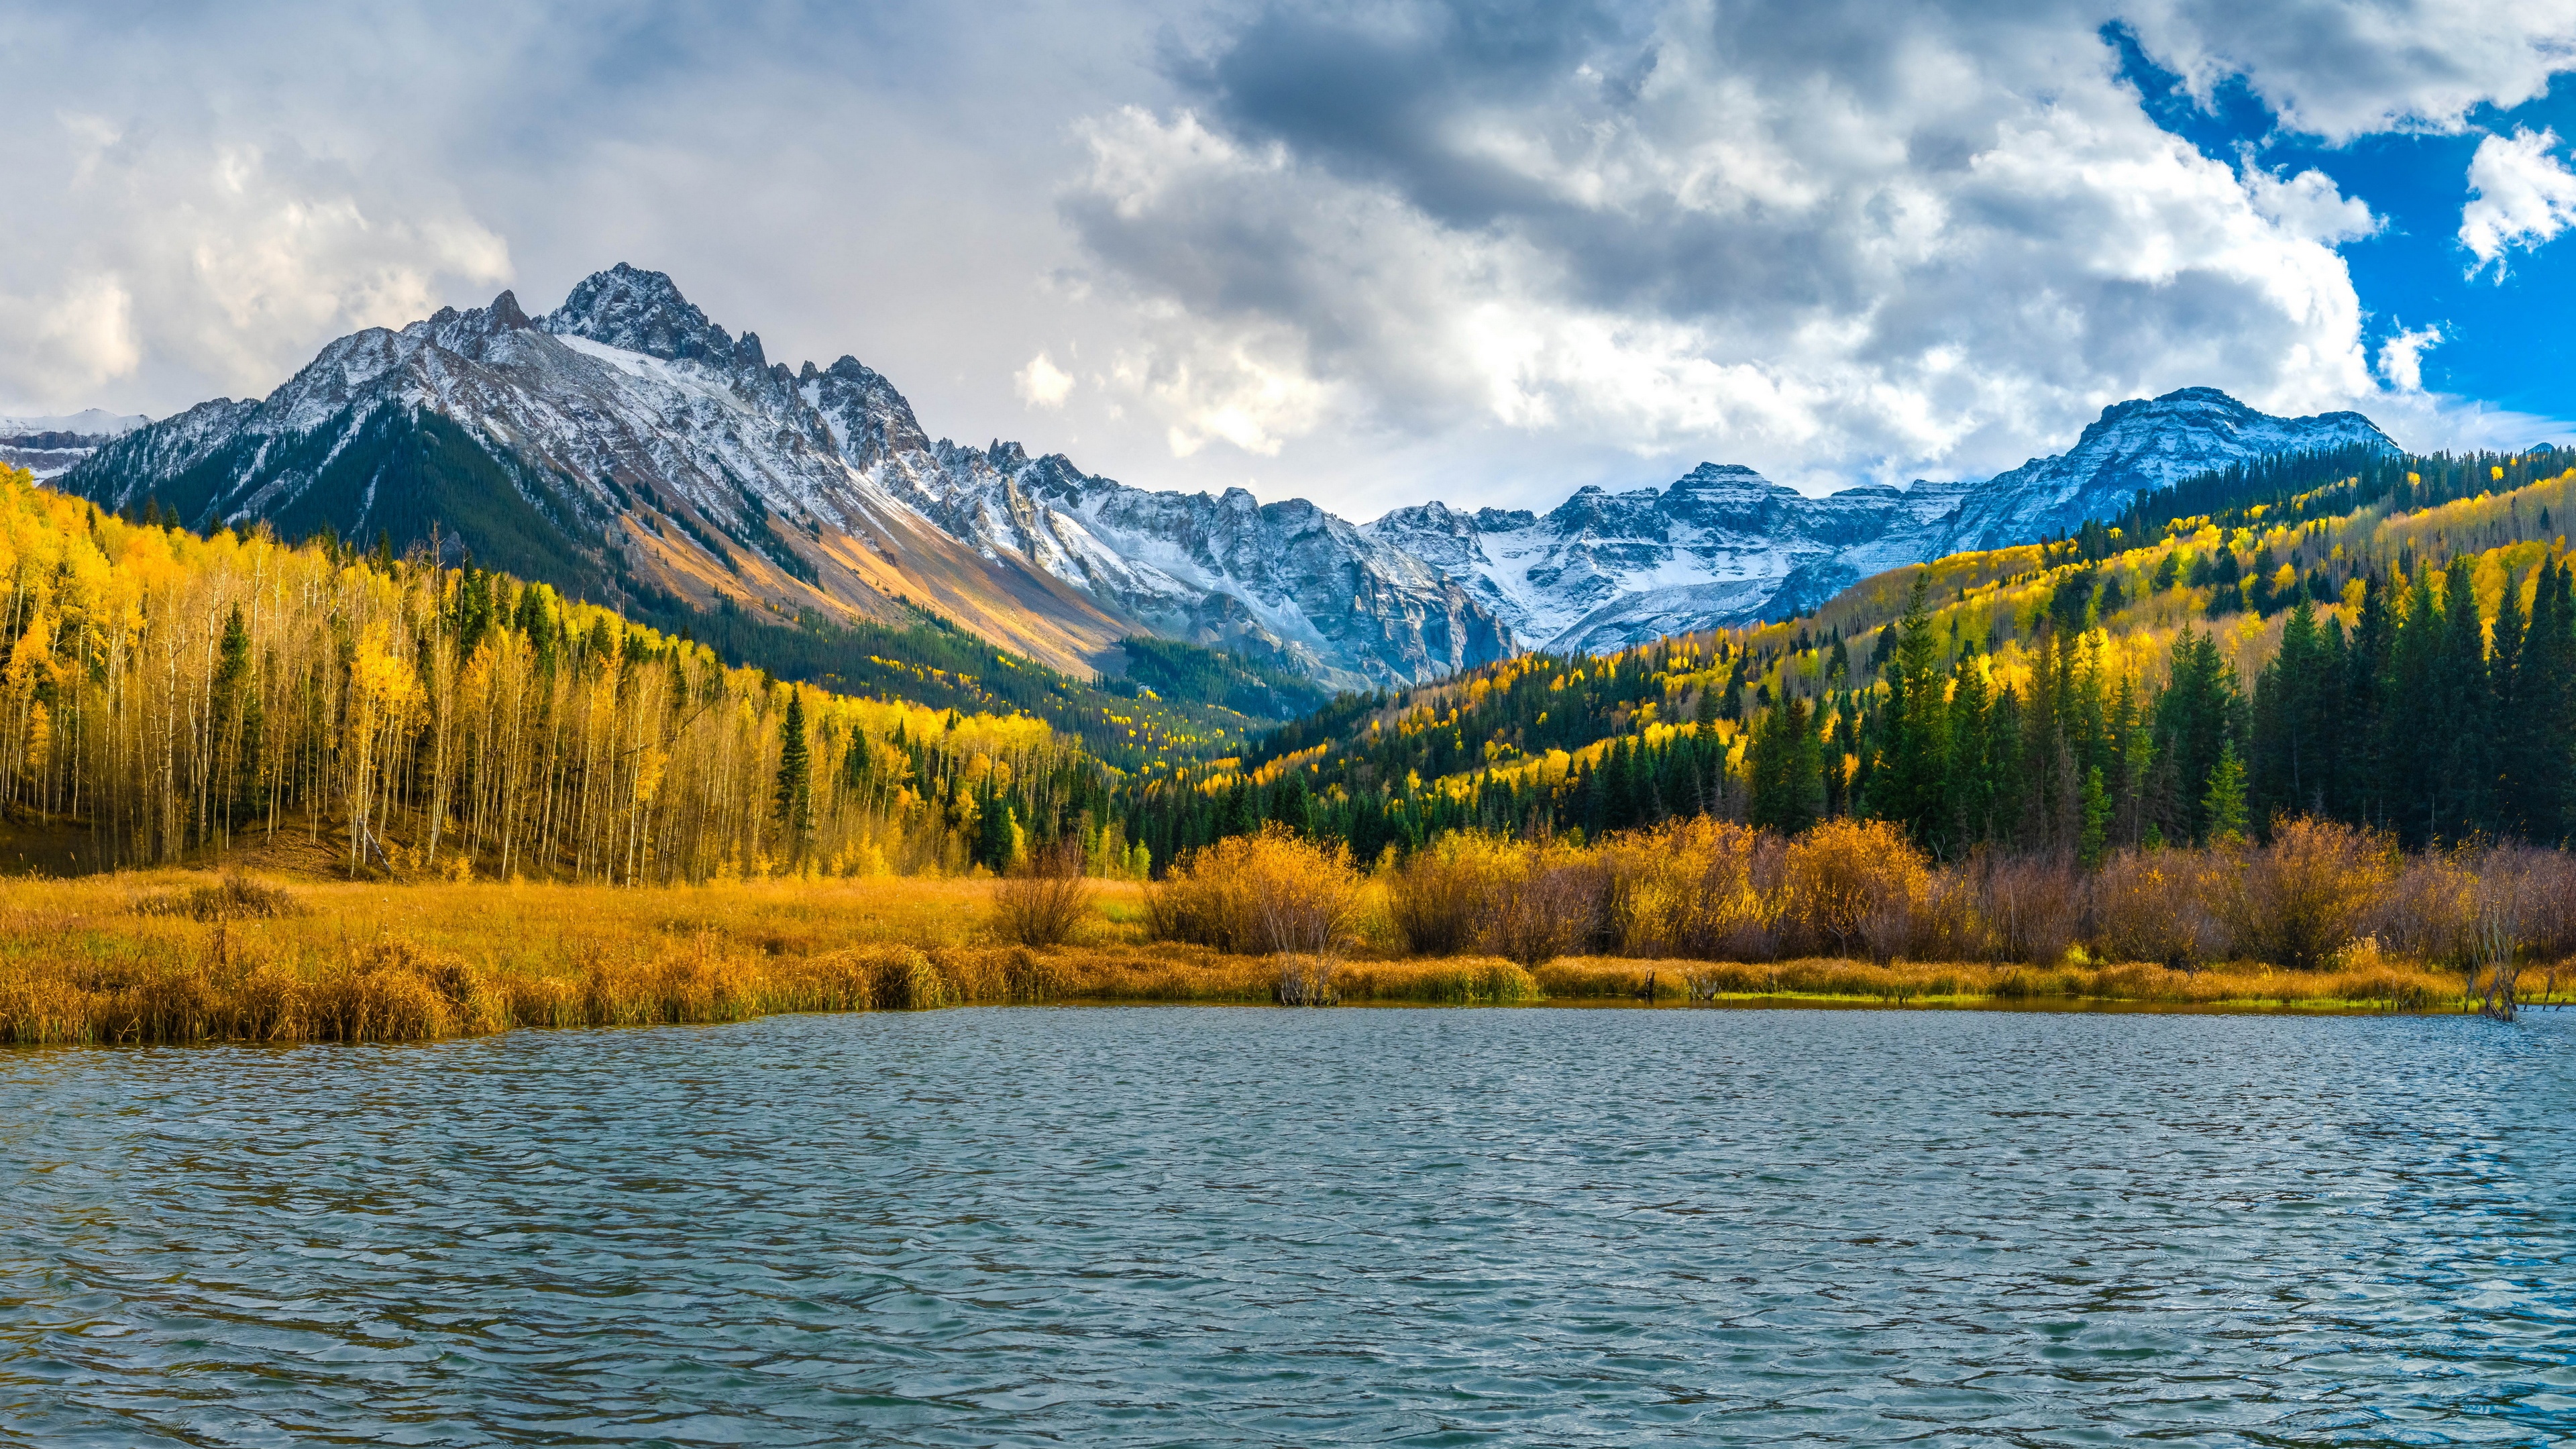 General 3840x2160 nature landscape mountains lake USA fall forest sky clouds water snow